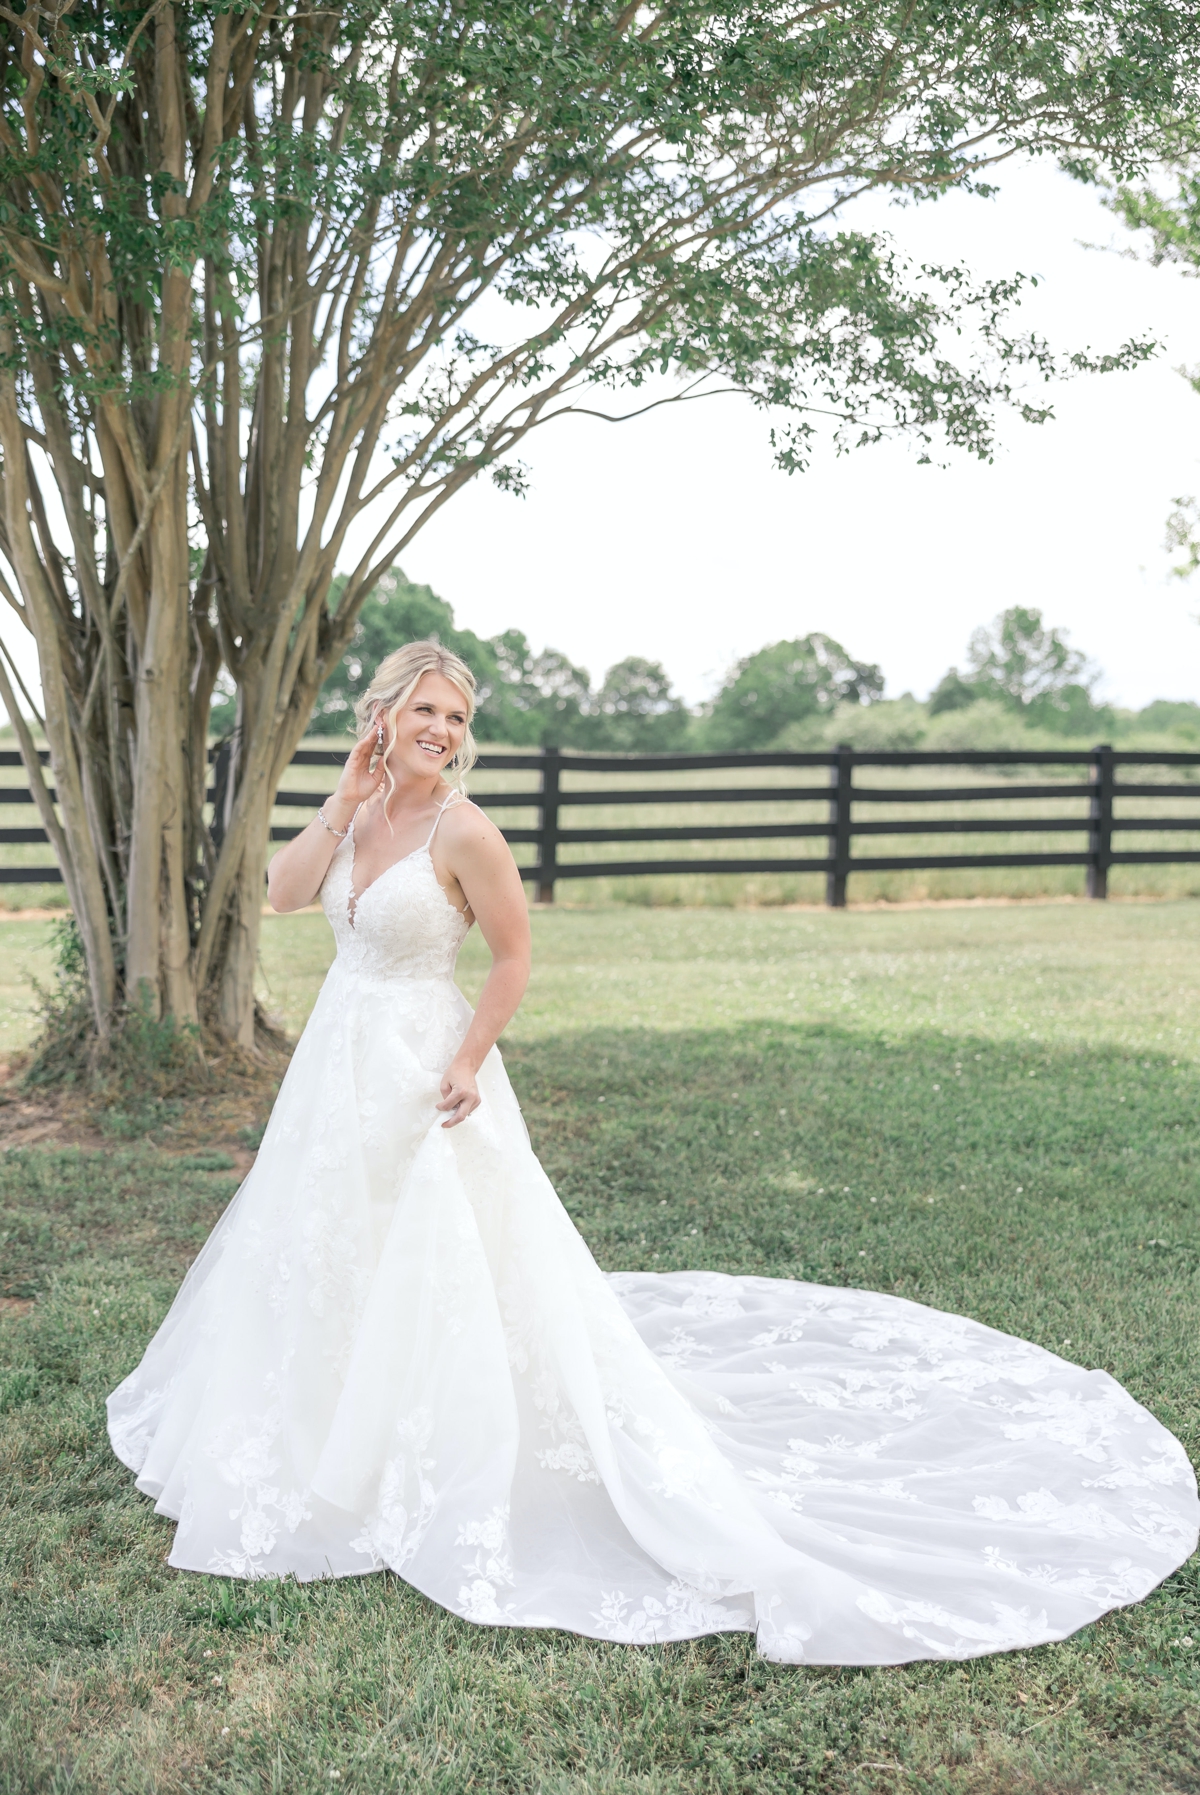 Grace playing with her hair and laughing over her shoulder as she stands by a tree on the lawn of Walters Barn in Lula GA in her wedding gown.